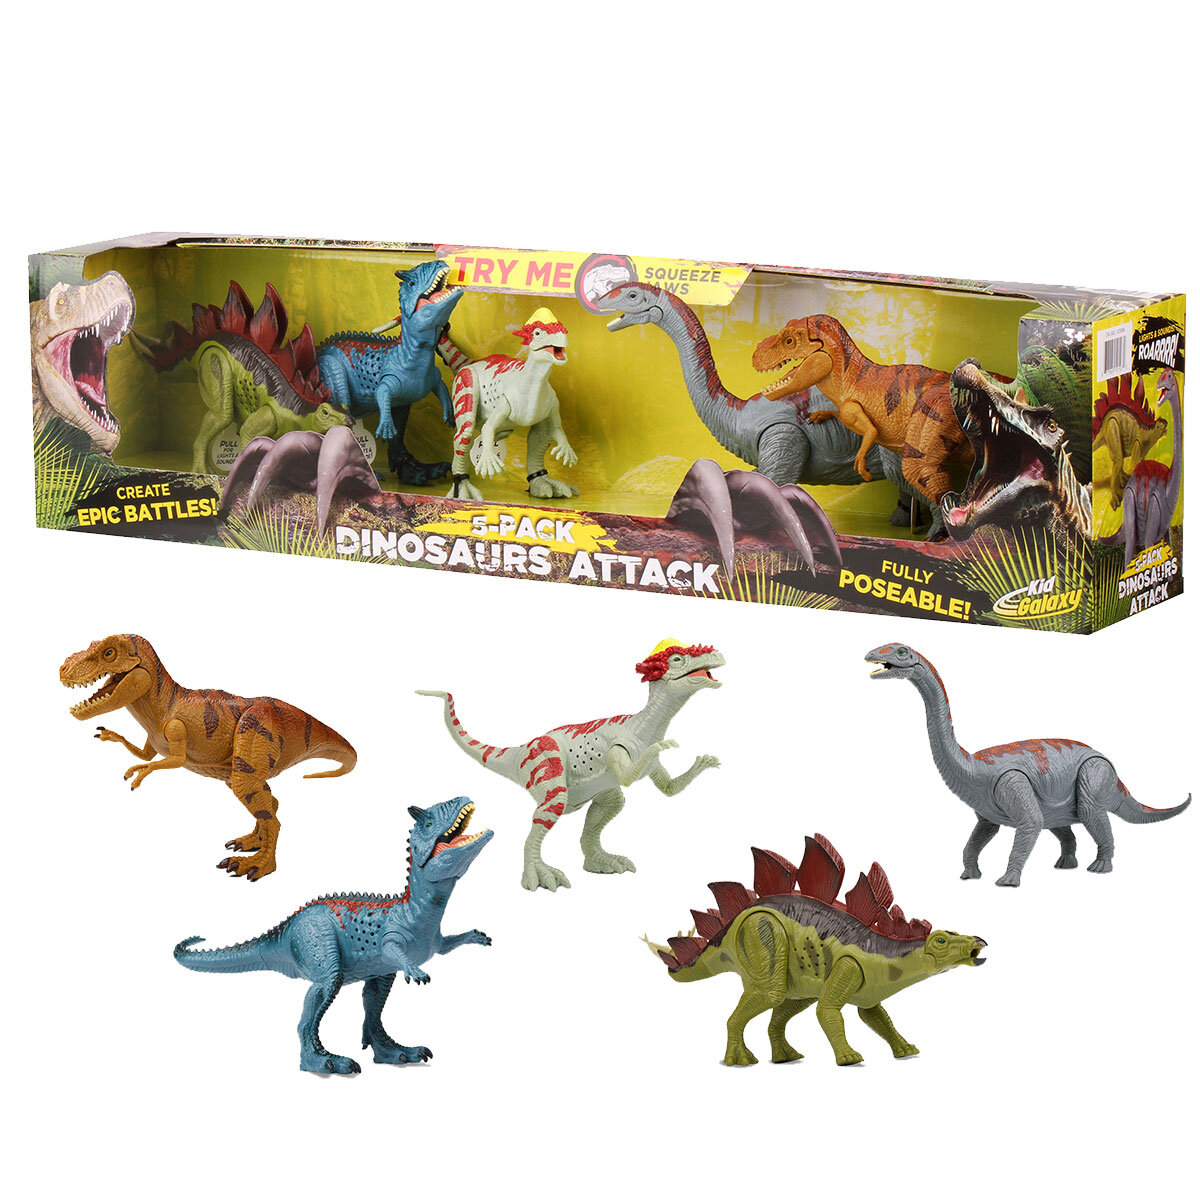 Buy Dinosaurs Attack 5 Pack Assorted Box & Item Combined Image at Costco.co.uk